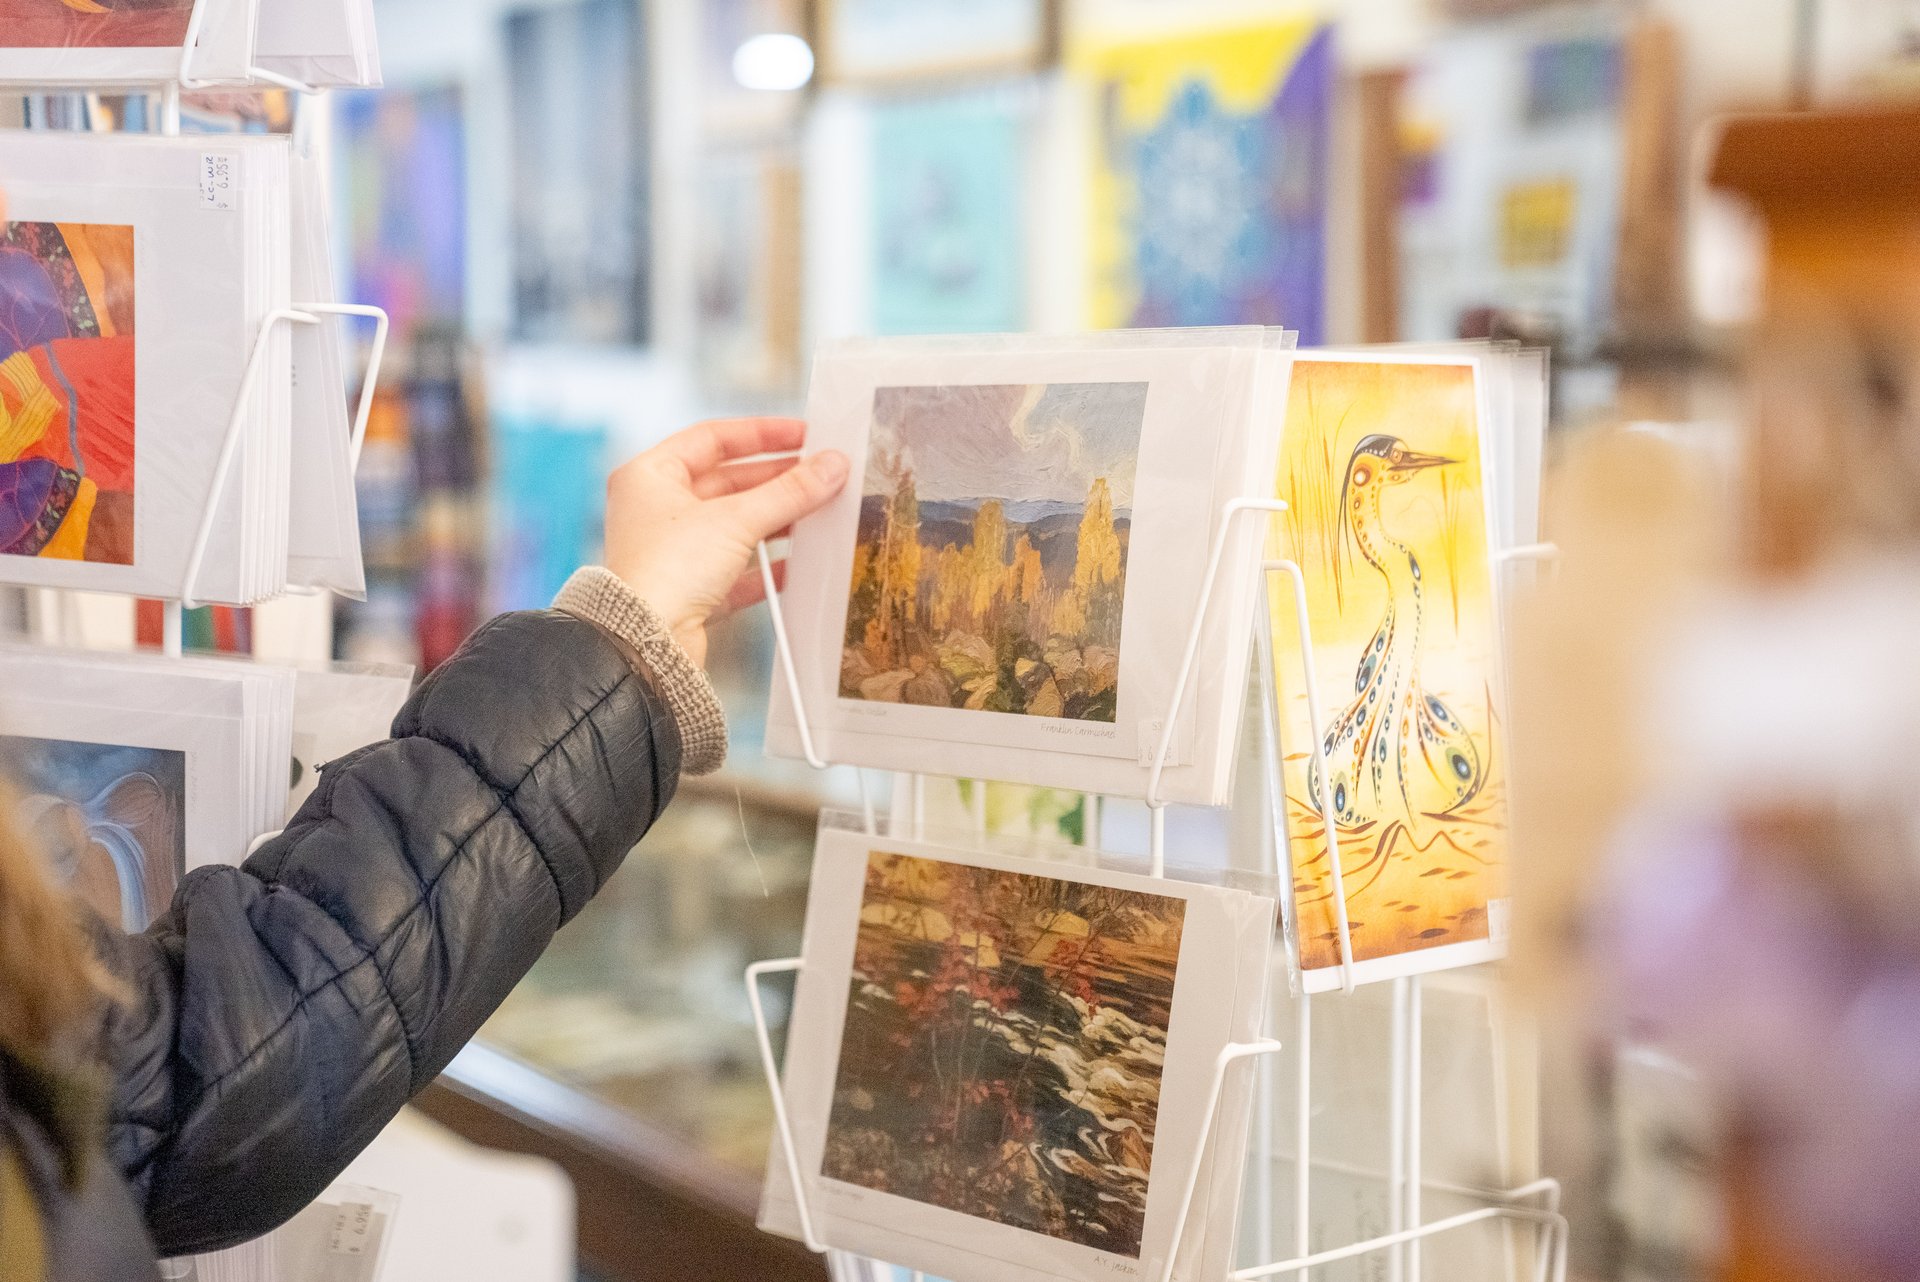 The Ahnisnabae Art Gallery; a shopper's hand picks up an art print off a rack. The background is full of many more racks of colourful art prints.